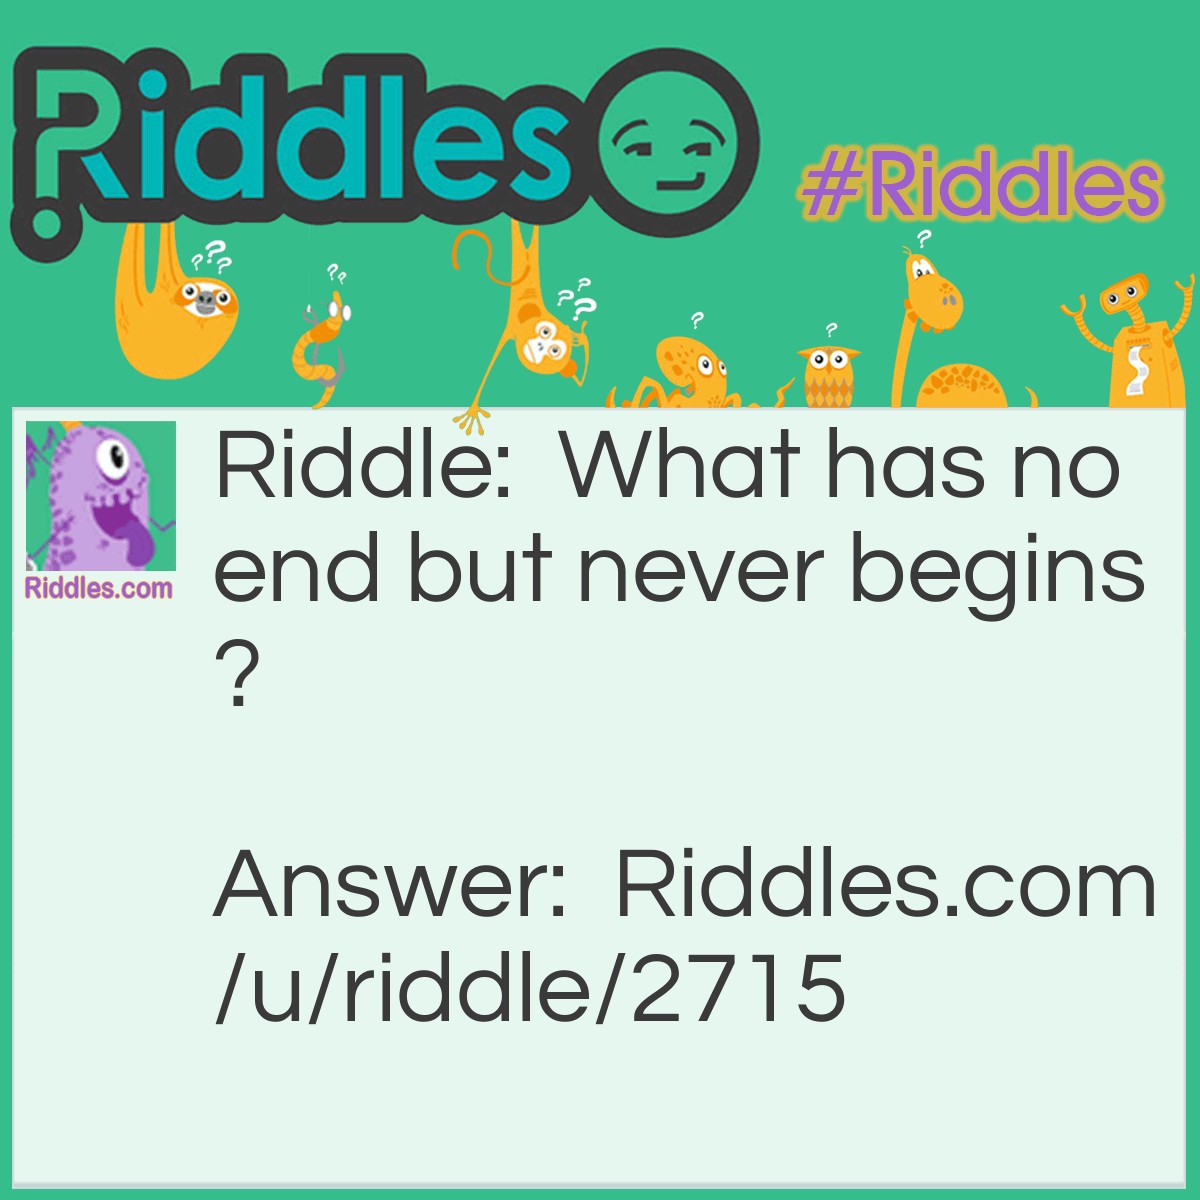 Riddle: What has no end but never begins? Answer: A book with a title but no story.